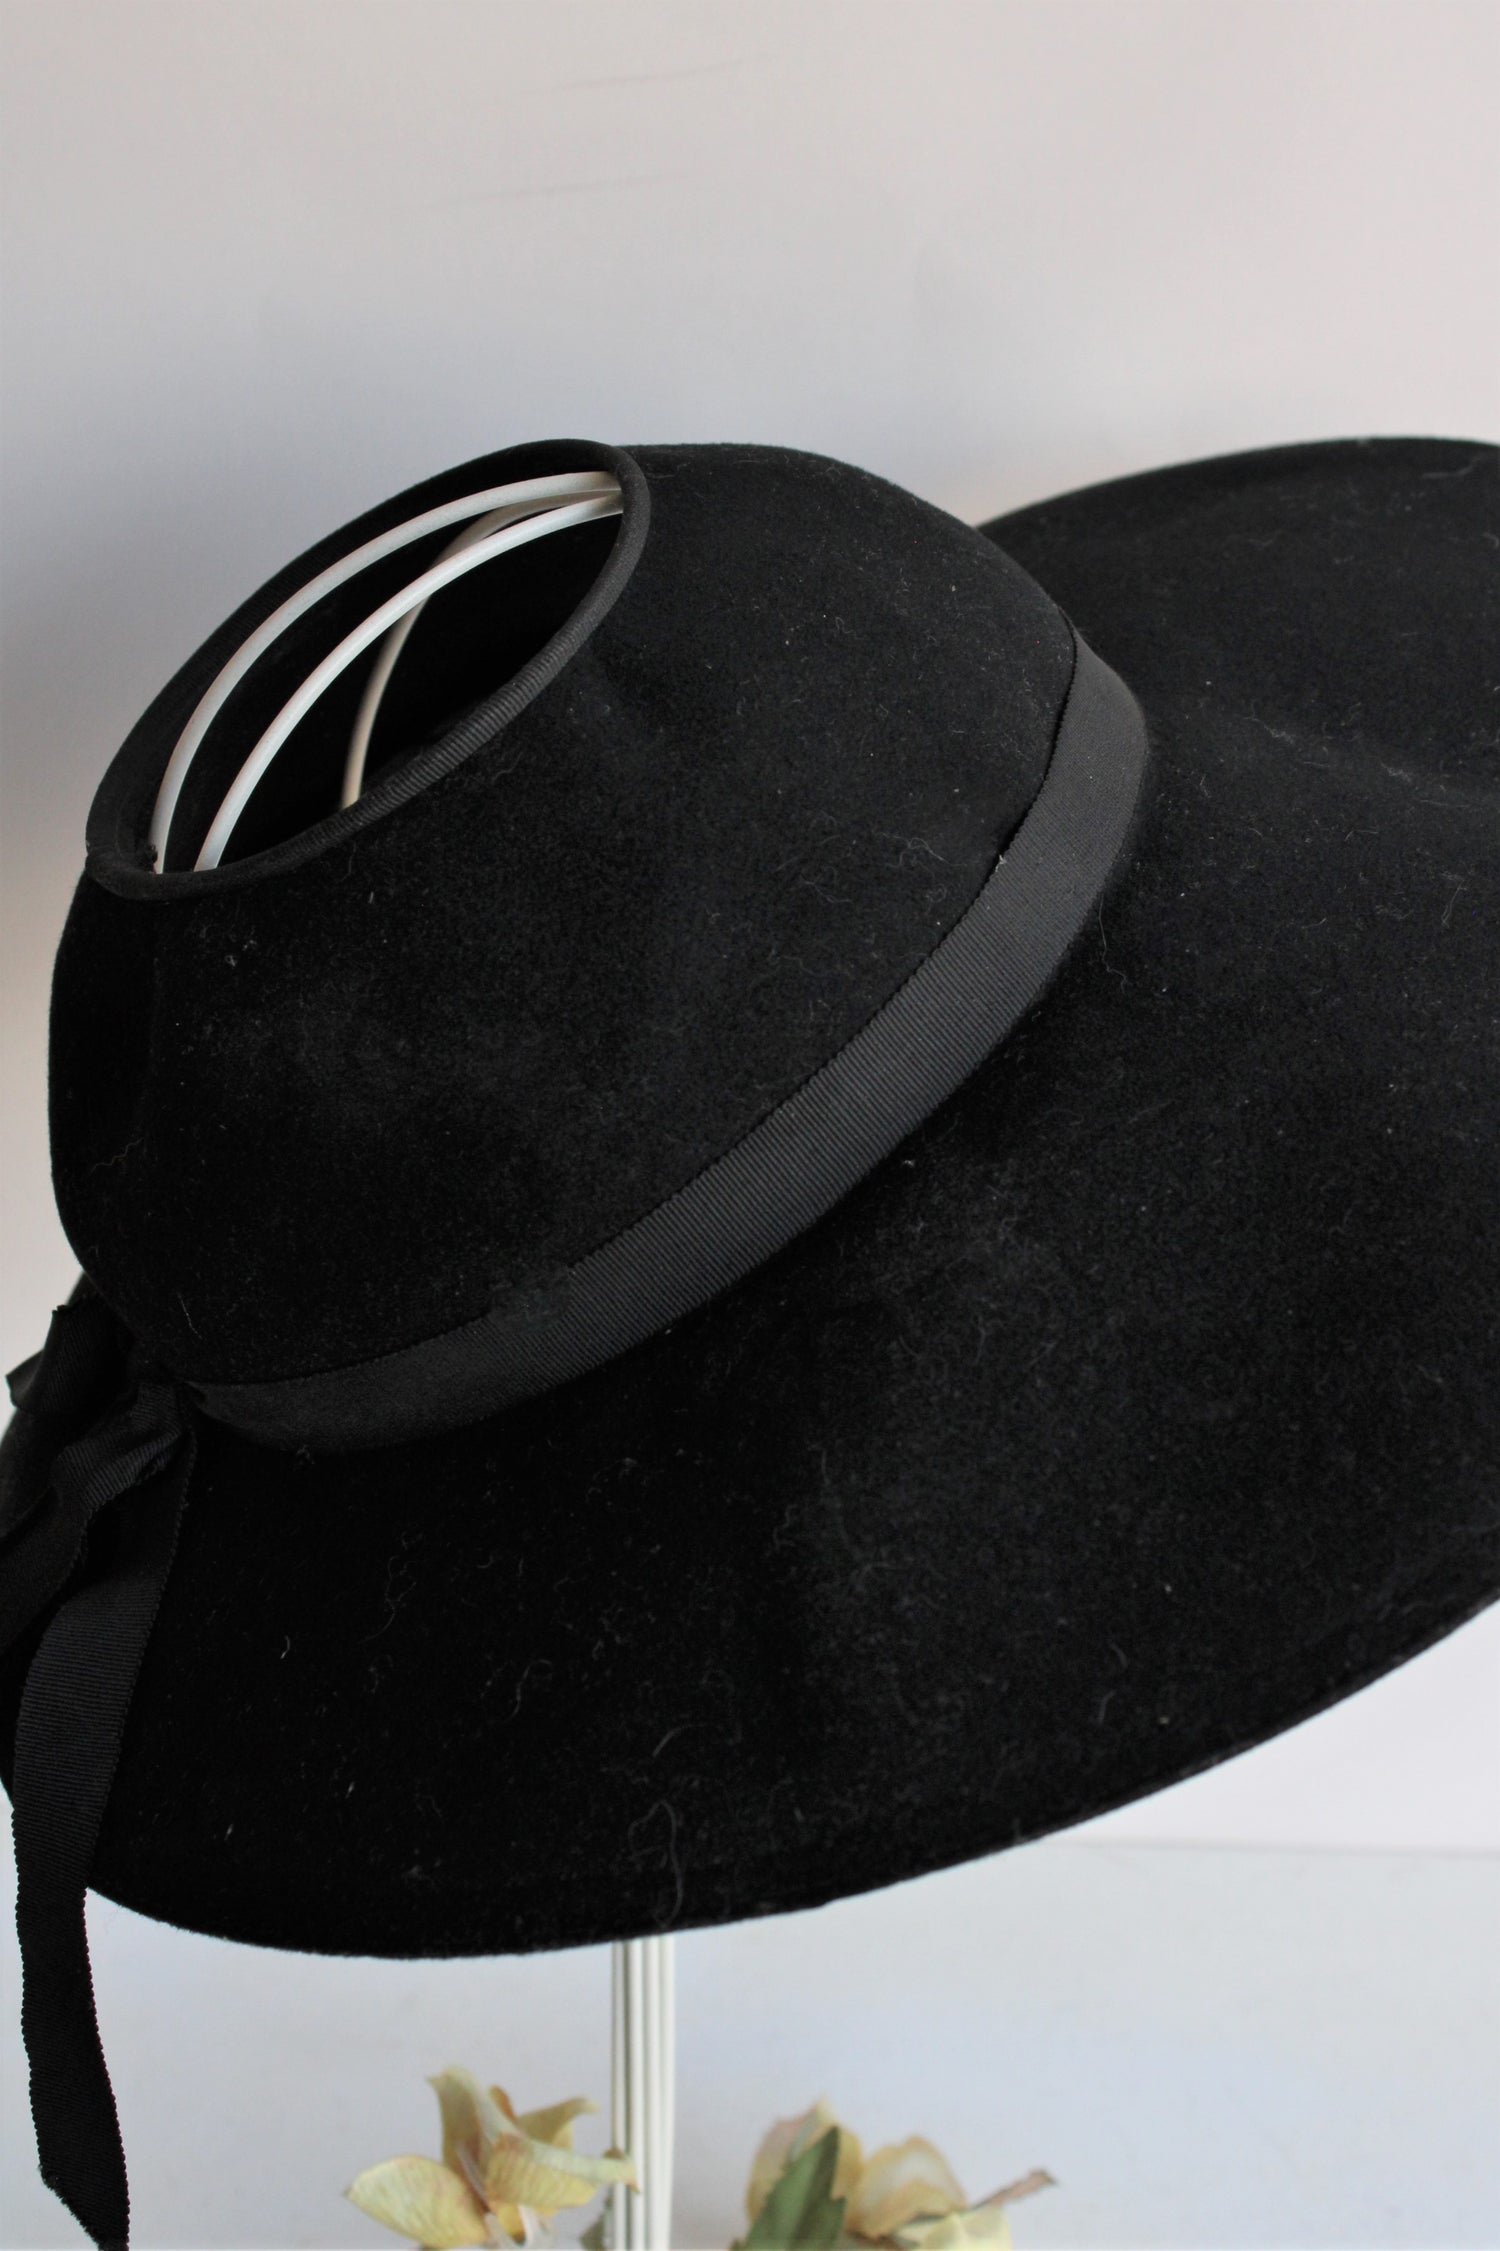 Vintage 1940s 1950s Wide Brimmed Black Hat with Open Crown by Merrimac